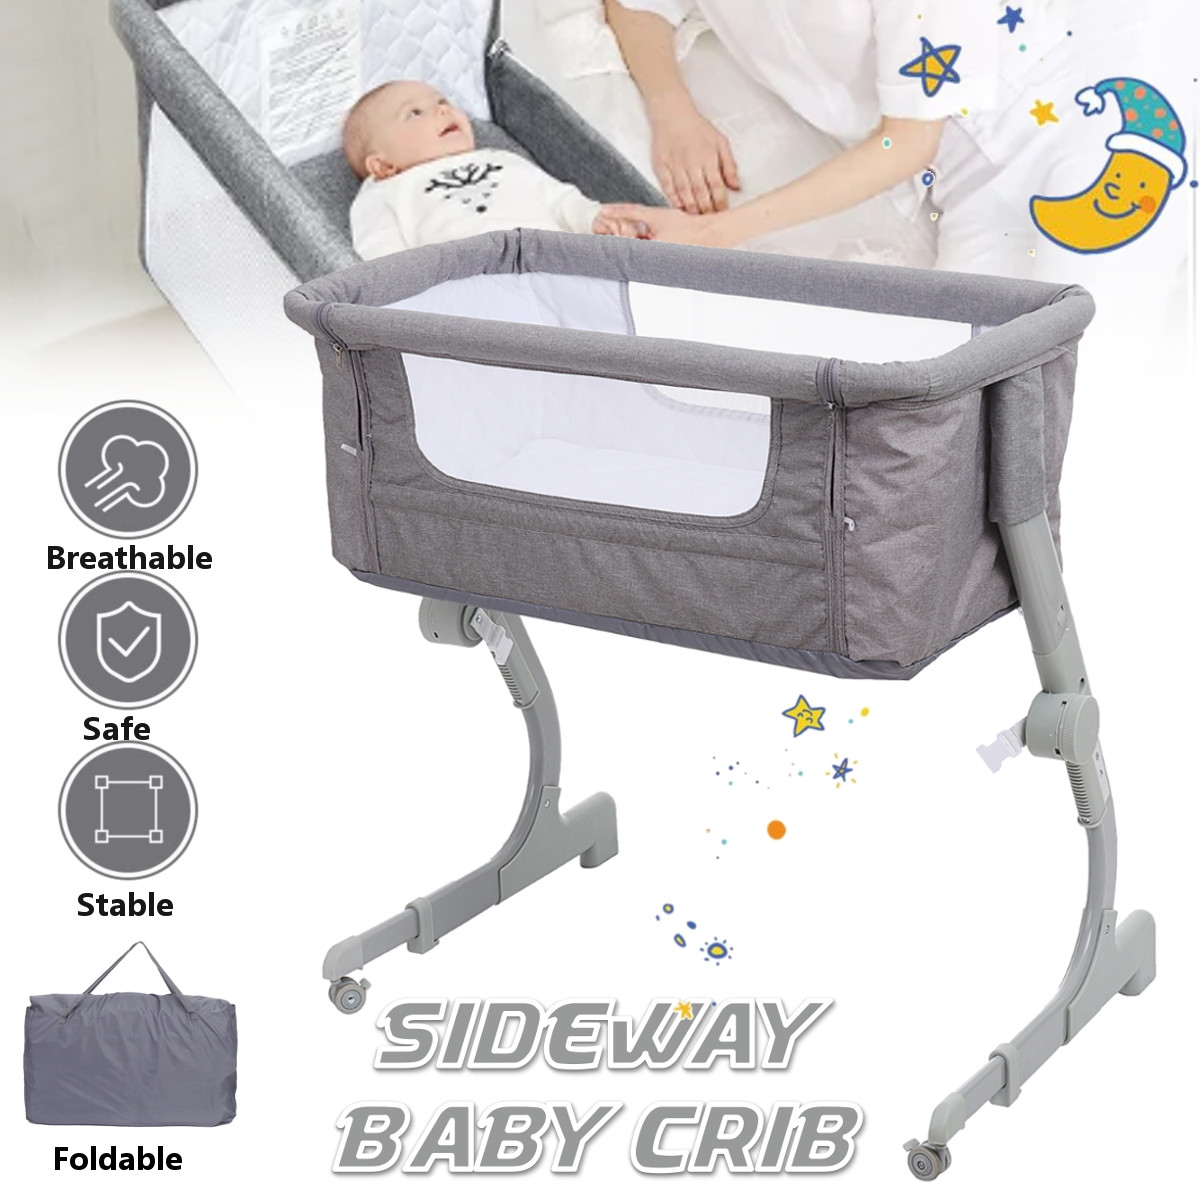 2-in-1-Portable-Sideway-Baby-Crib-Height-Adjustment-Infans-Stitching-Bed-Removable-Bed-1942872-1